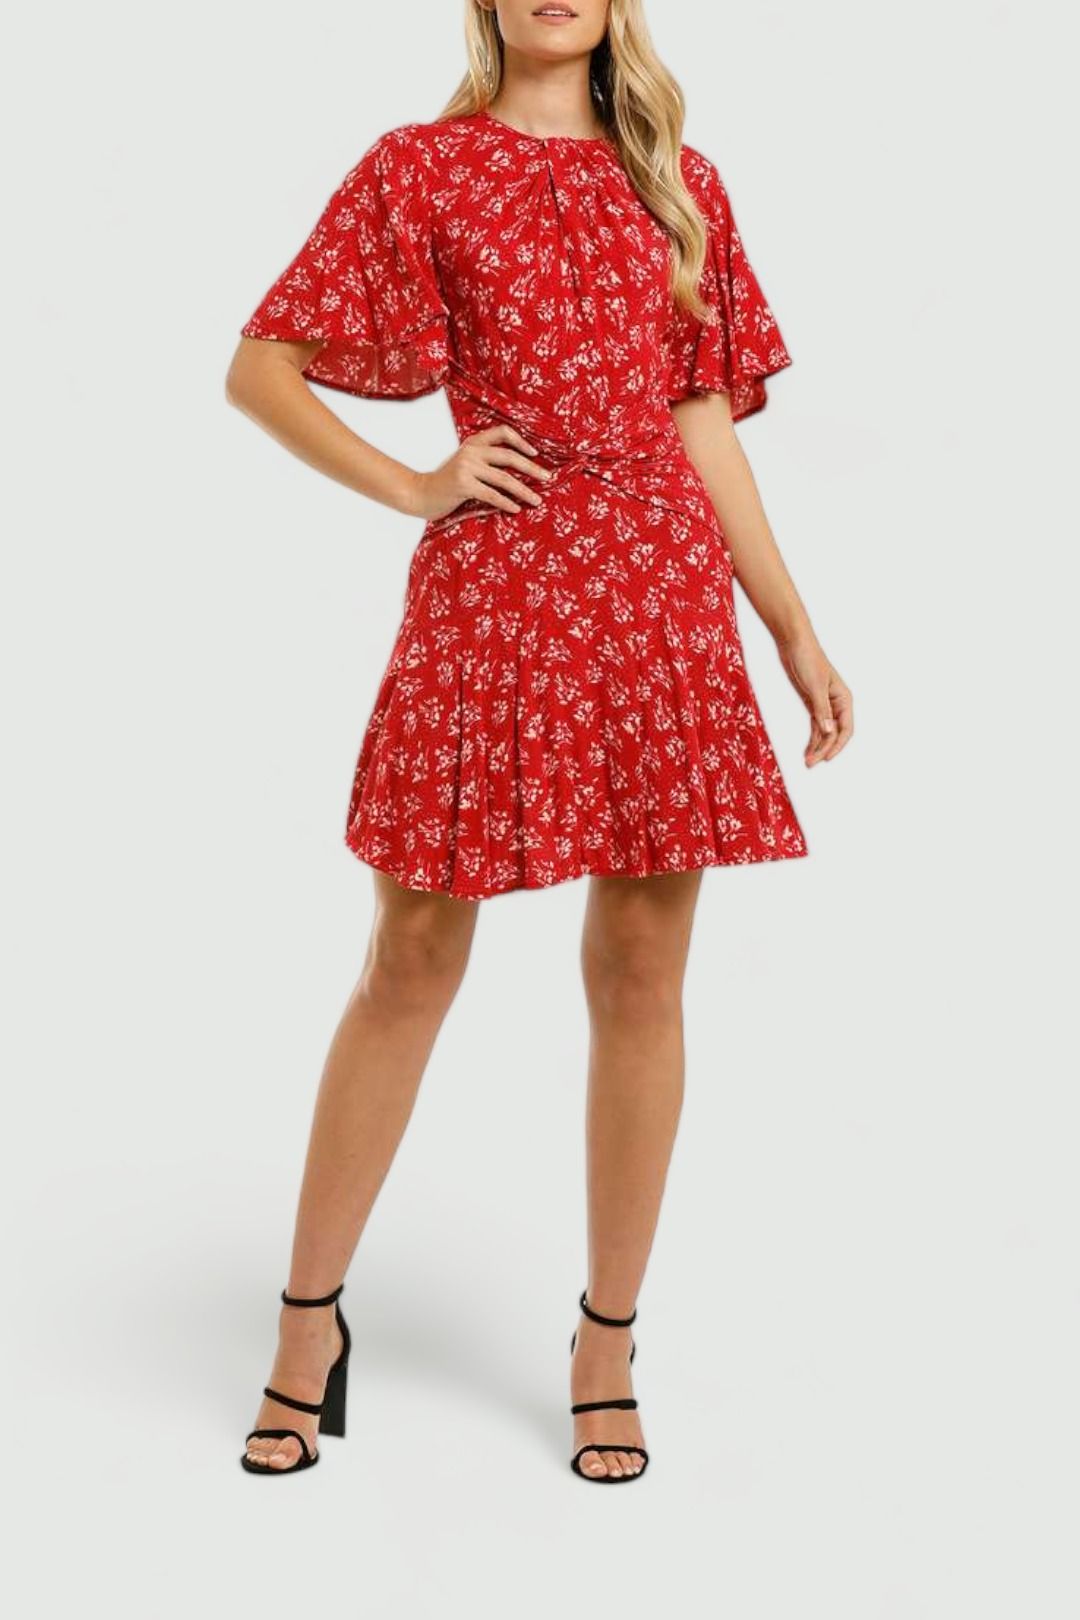 Lover-Mimosa-Mini-Dress-Red-Front